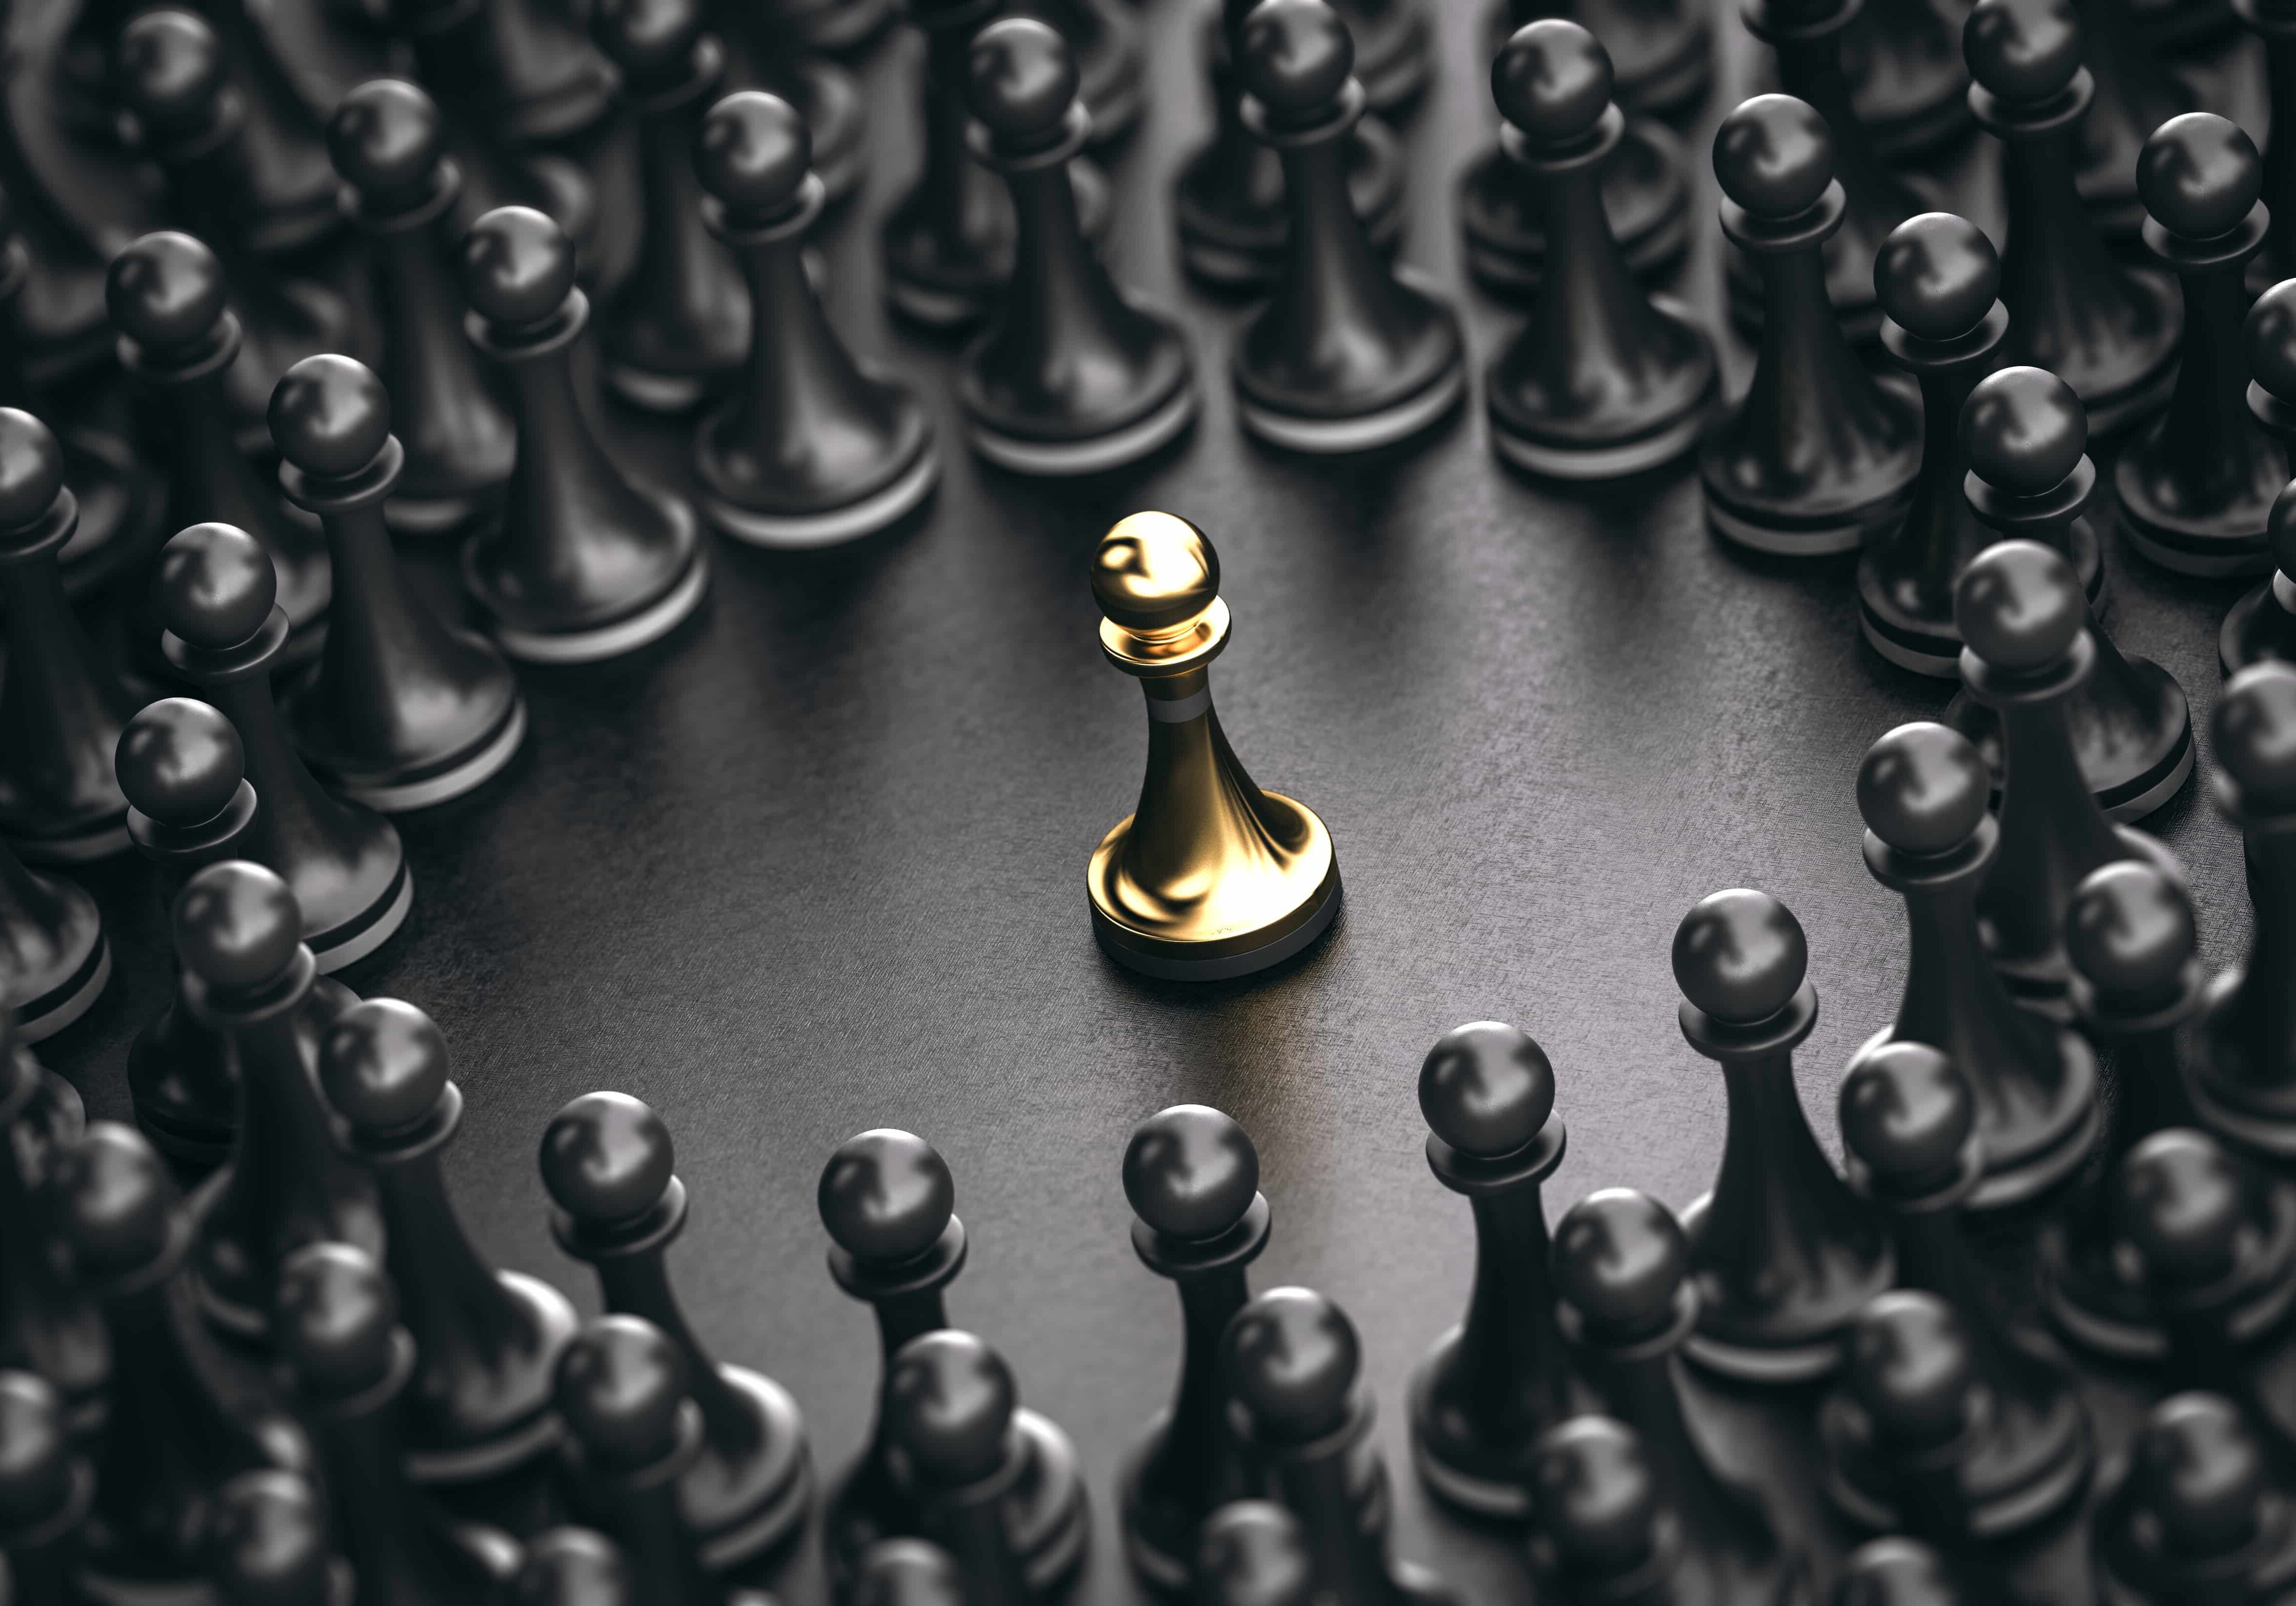 3D illustration of black pawns around a golden one standing out from the crowd. Concept of leadership